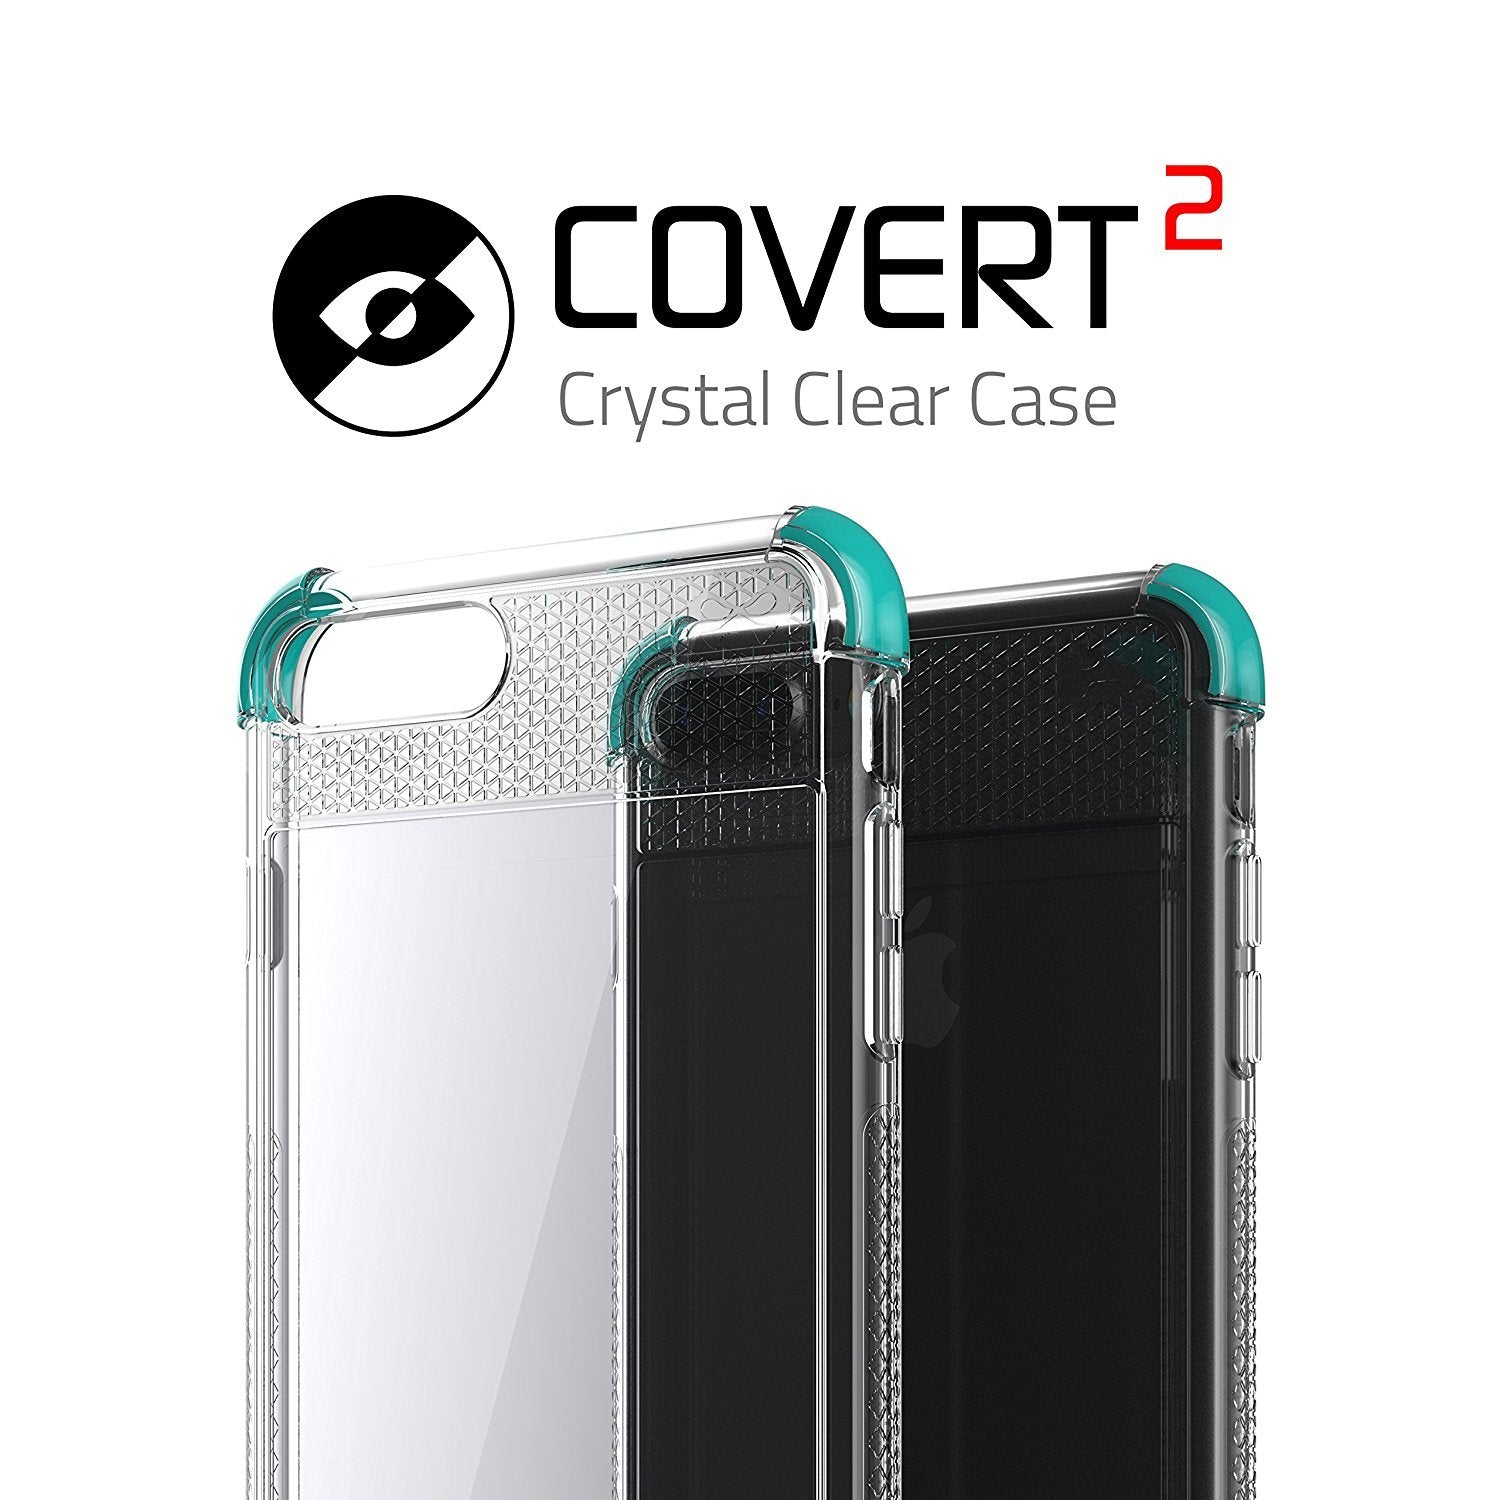 iPhone 8+ Plus Case, Ghostek Covert 2 Series for iPhone 8+ Plus Protective Case [ Teal] - PunkCase NZ